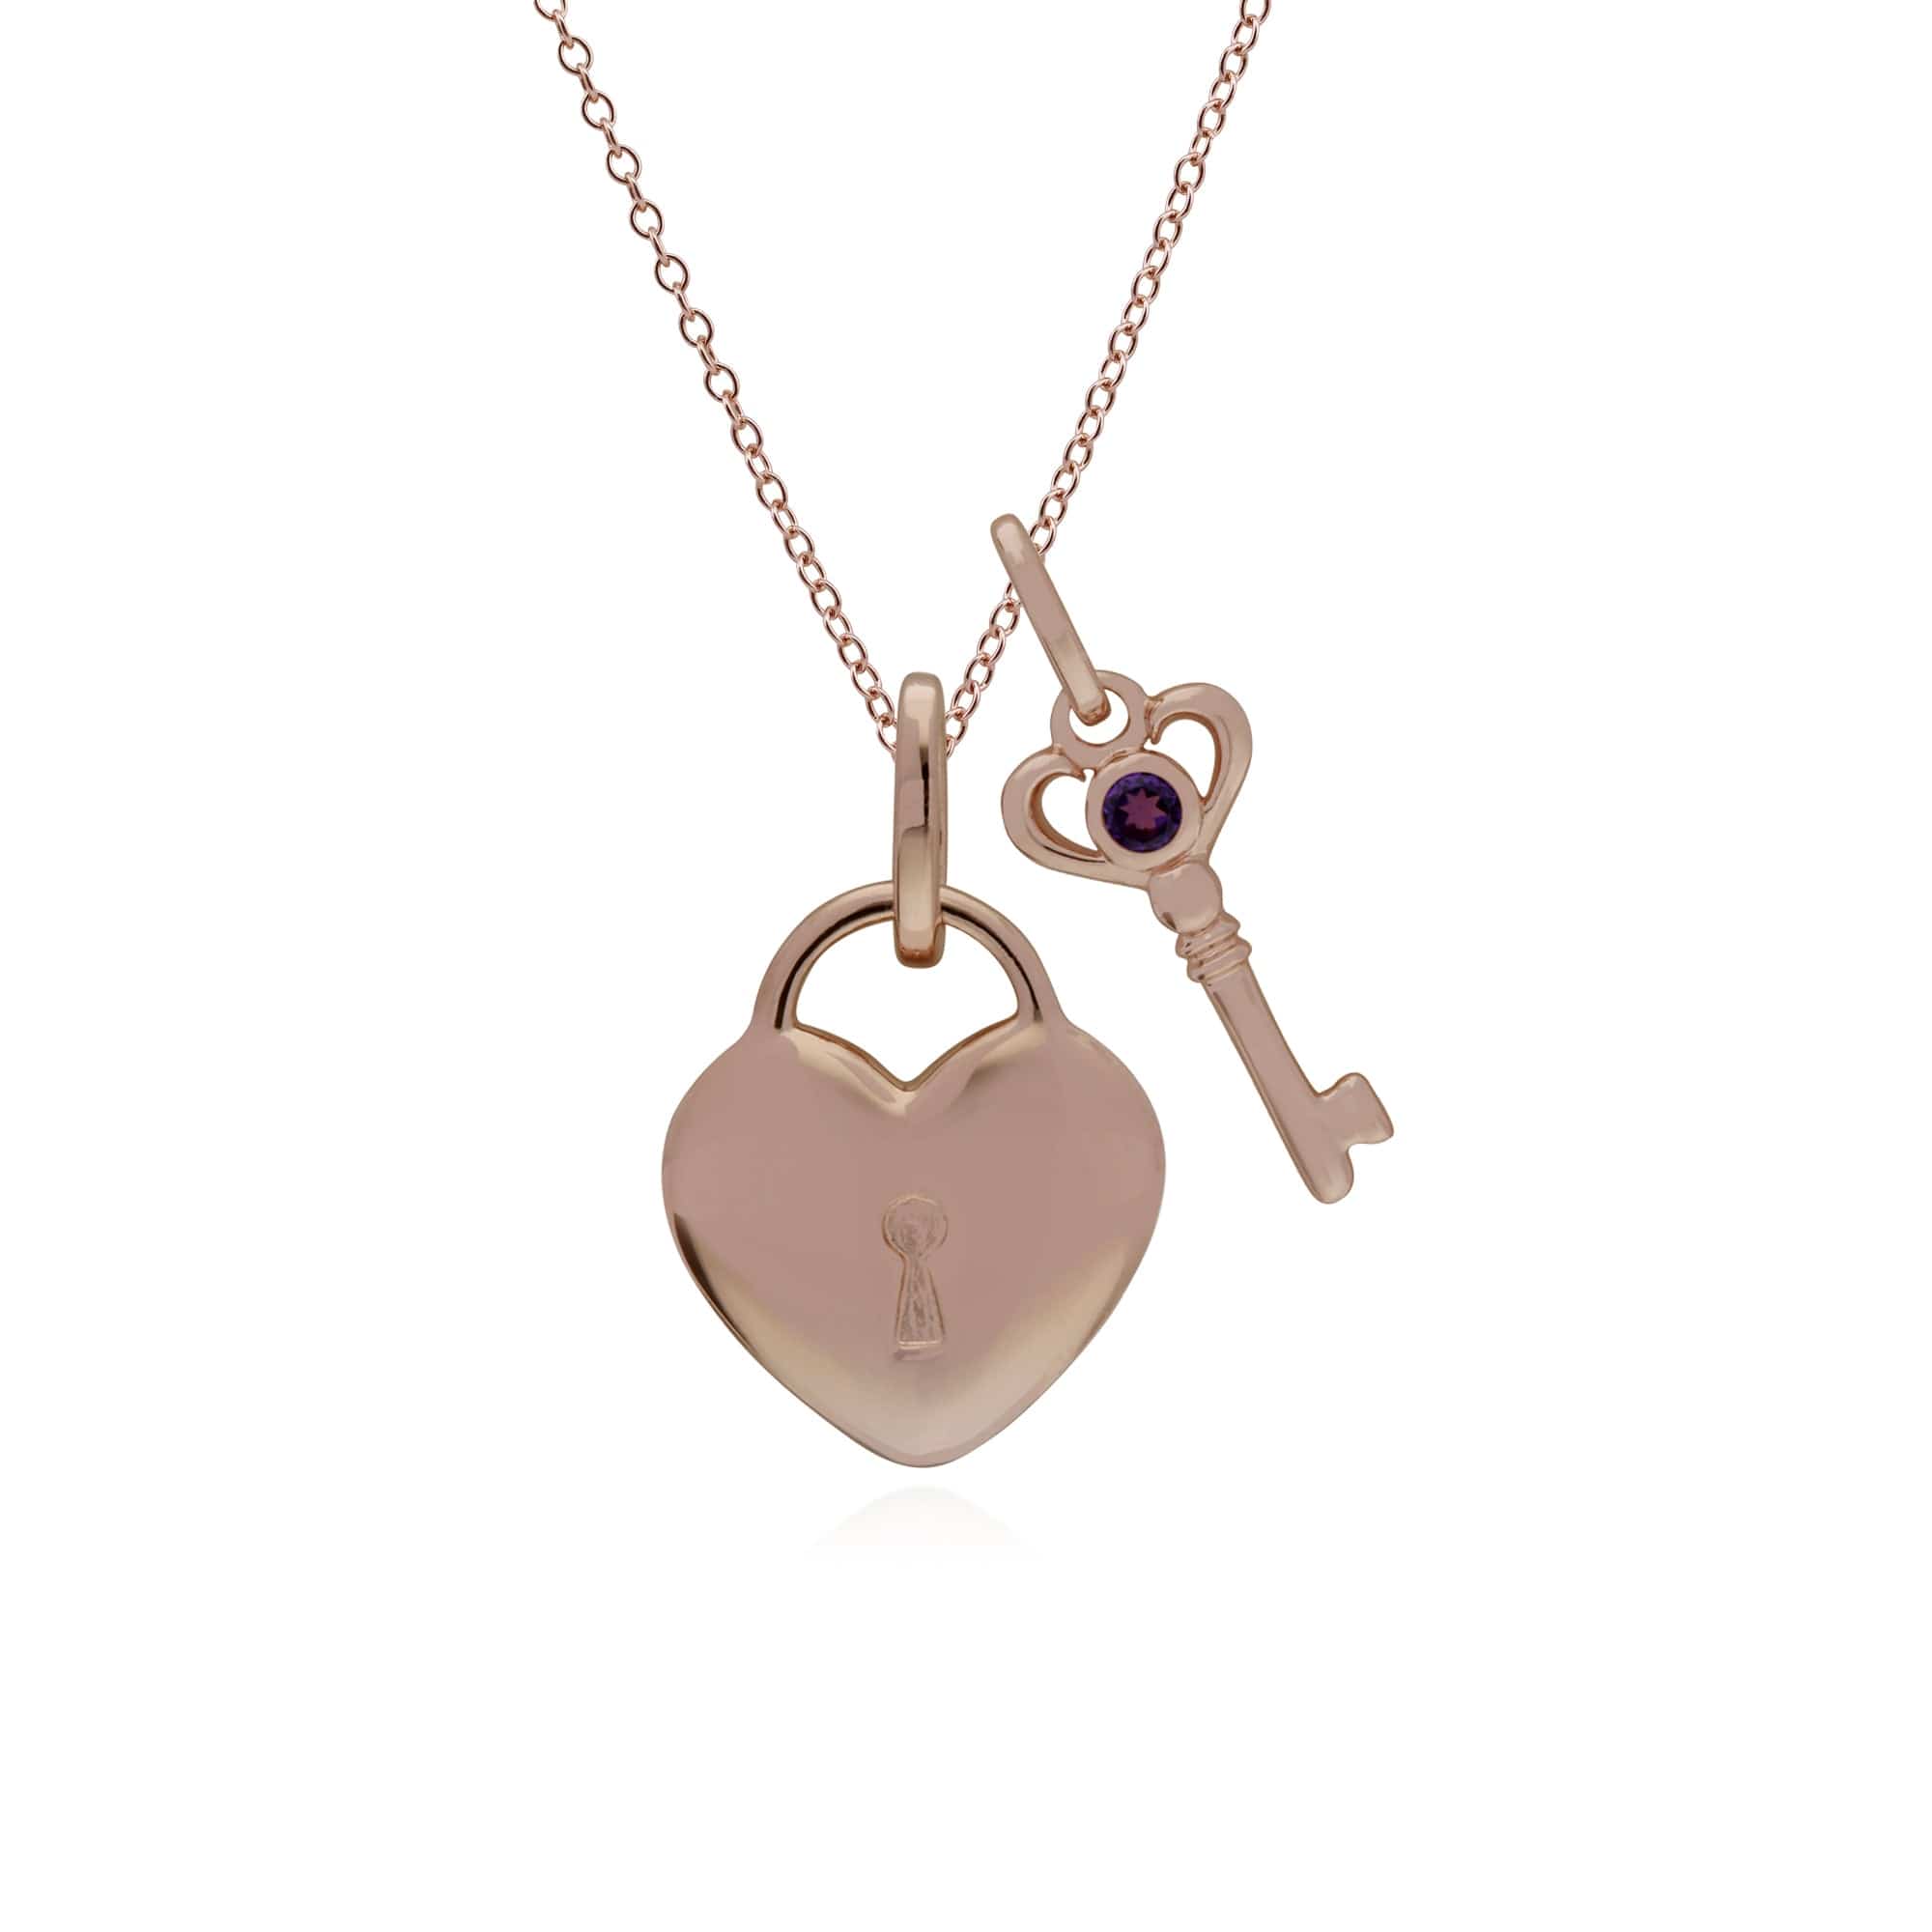 270P026304925-270P026901925 Classic Heart Lock Pendant & Amethyst Key Charm in Rose Gold Plated 925 Sterling Silver 1